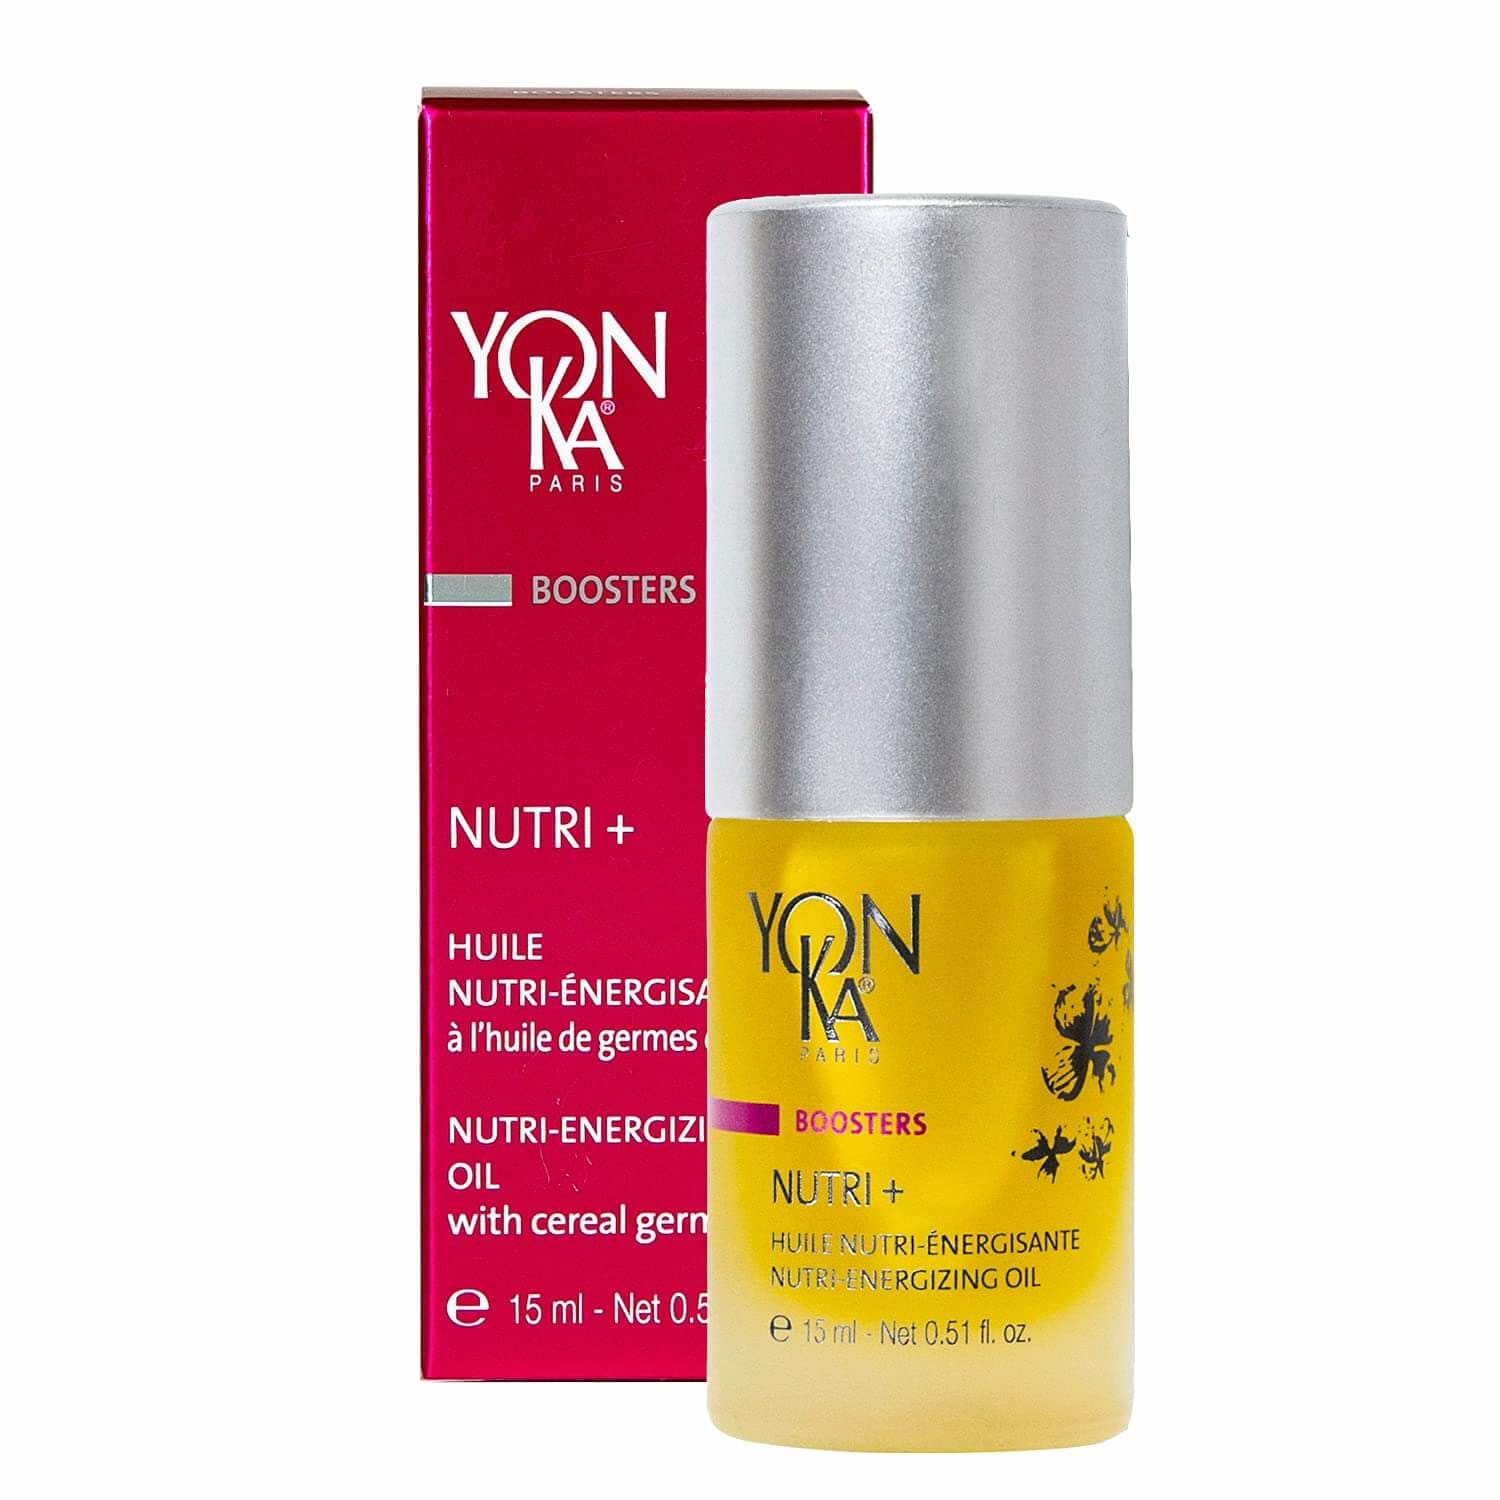 Yon-Ka Booster Nutri+ Energizing Oil Anti-Aging Concentrate - Treat Fine Lines and Wrinkles with Vitamin E - 15ml